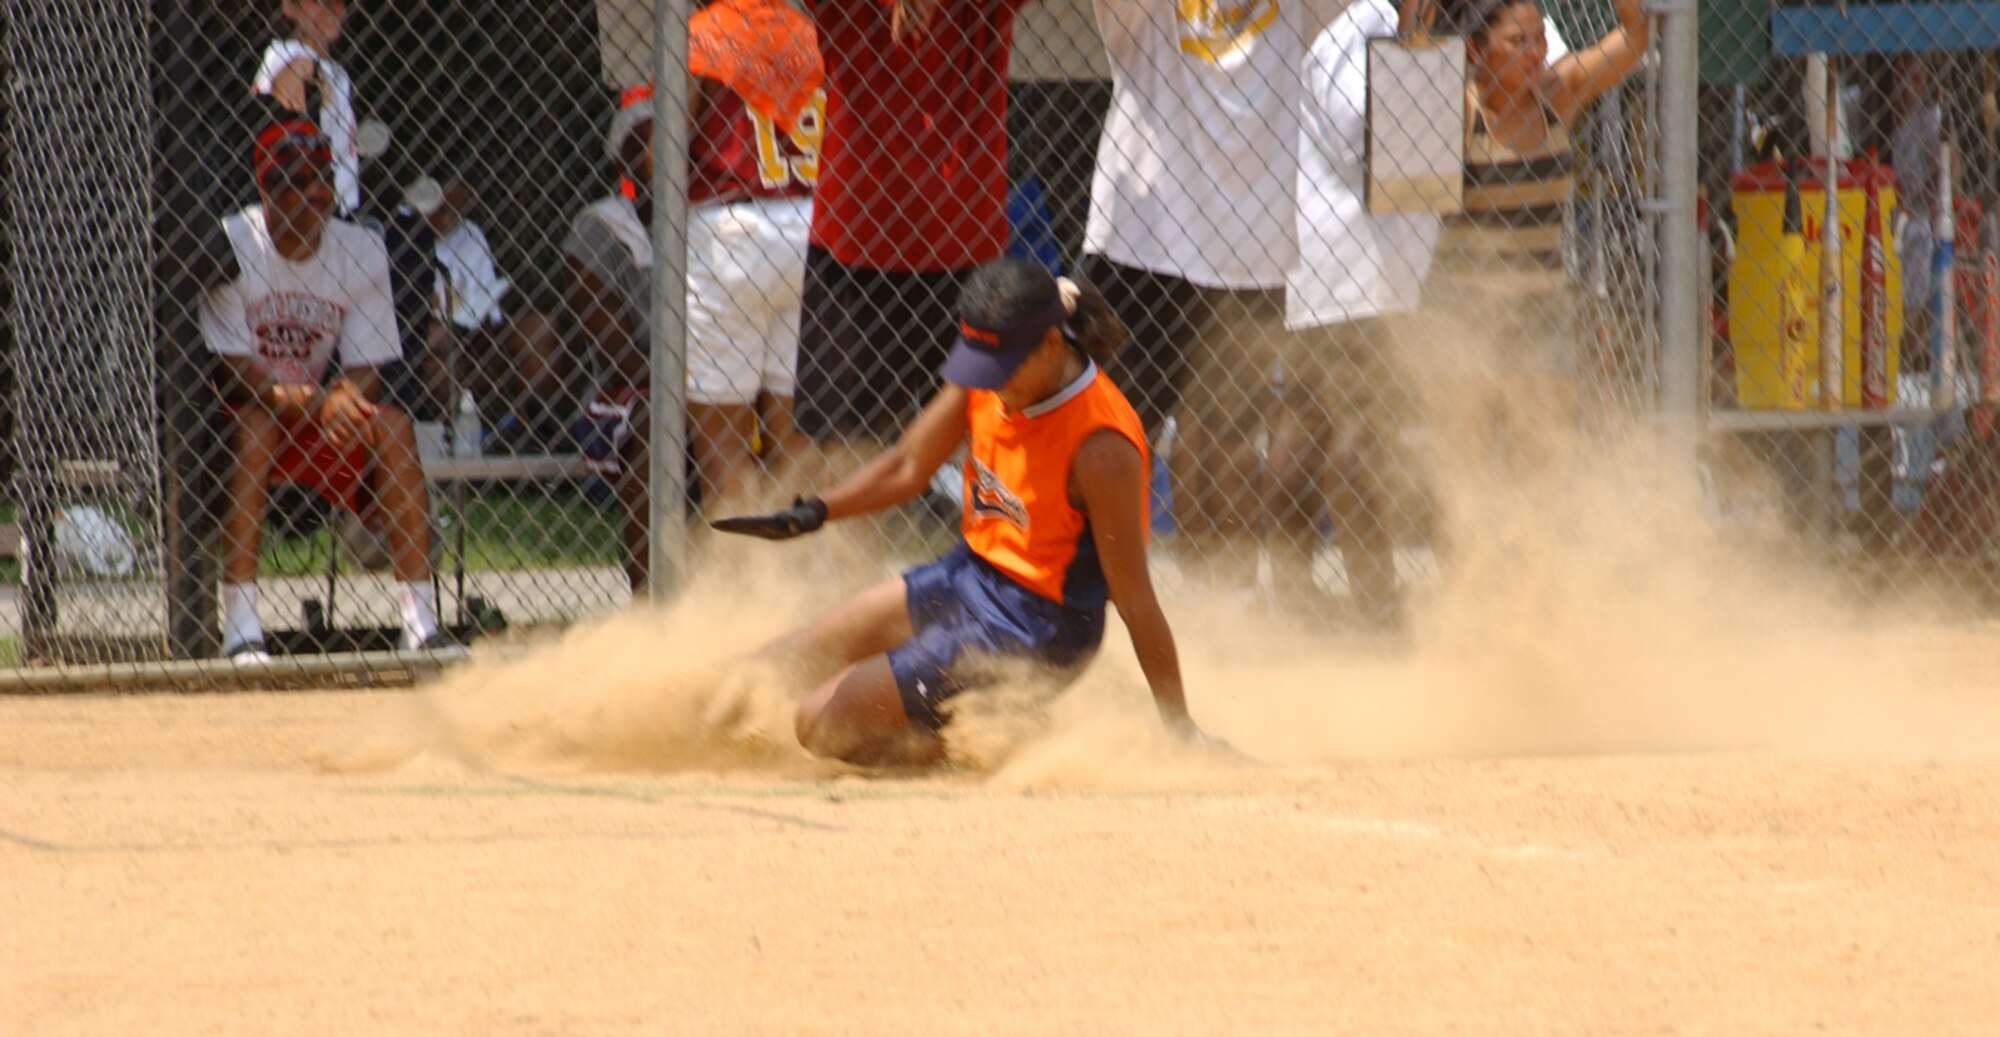 ANDREWS AIR FORCE BASE, Md. -- Tech. Sgt. Valerie Raynor, 459th Maintenance Group, slides home safely in a game against Fort Myer in NSA Military World Series Softball Tournament.  The 459th Air Refeuling Wing sponsored ladies softball team, Synergy, won this game and took third place in the world series.  The world series was held at Walter Reed Army Medical Center, Md.